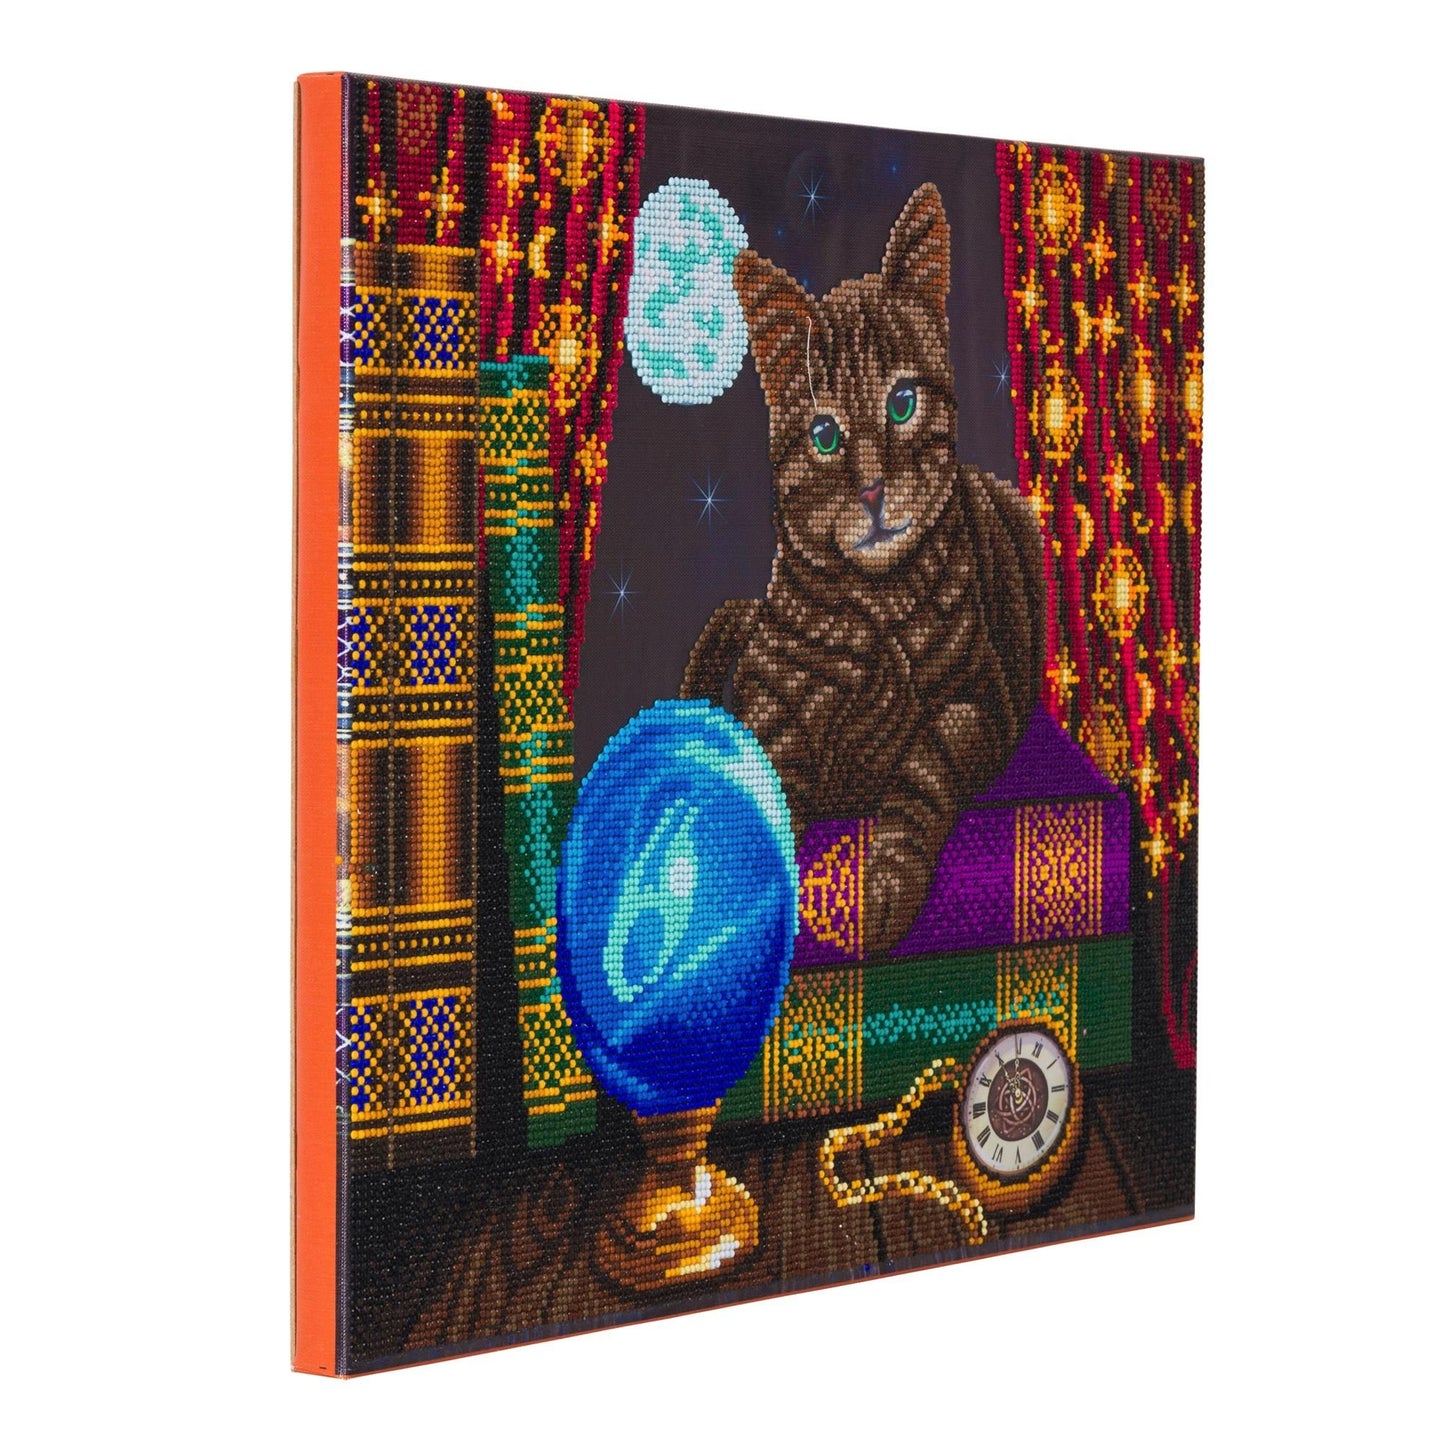 Craft Buddy 40cm x 50cm Crystal Art Kit with LED Lights - The Fortune Teller Cat